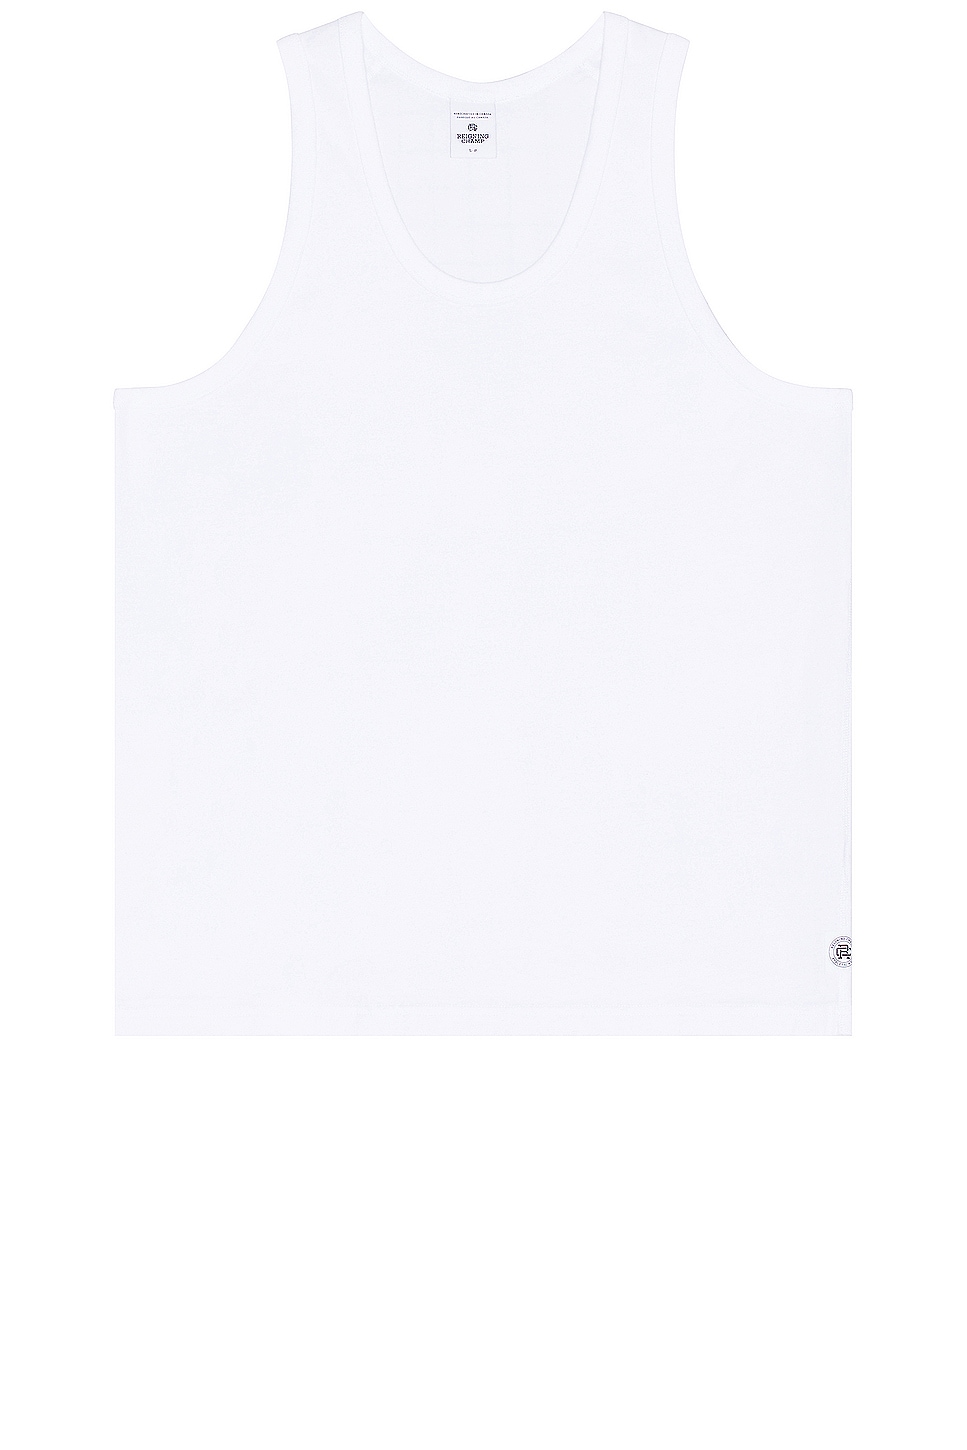 Image 1 of Reigning Champ Lightweight Jersey Tank Top in White